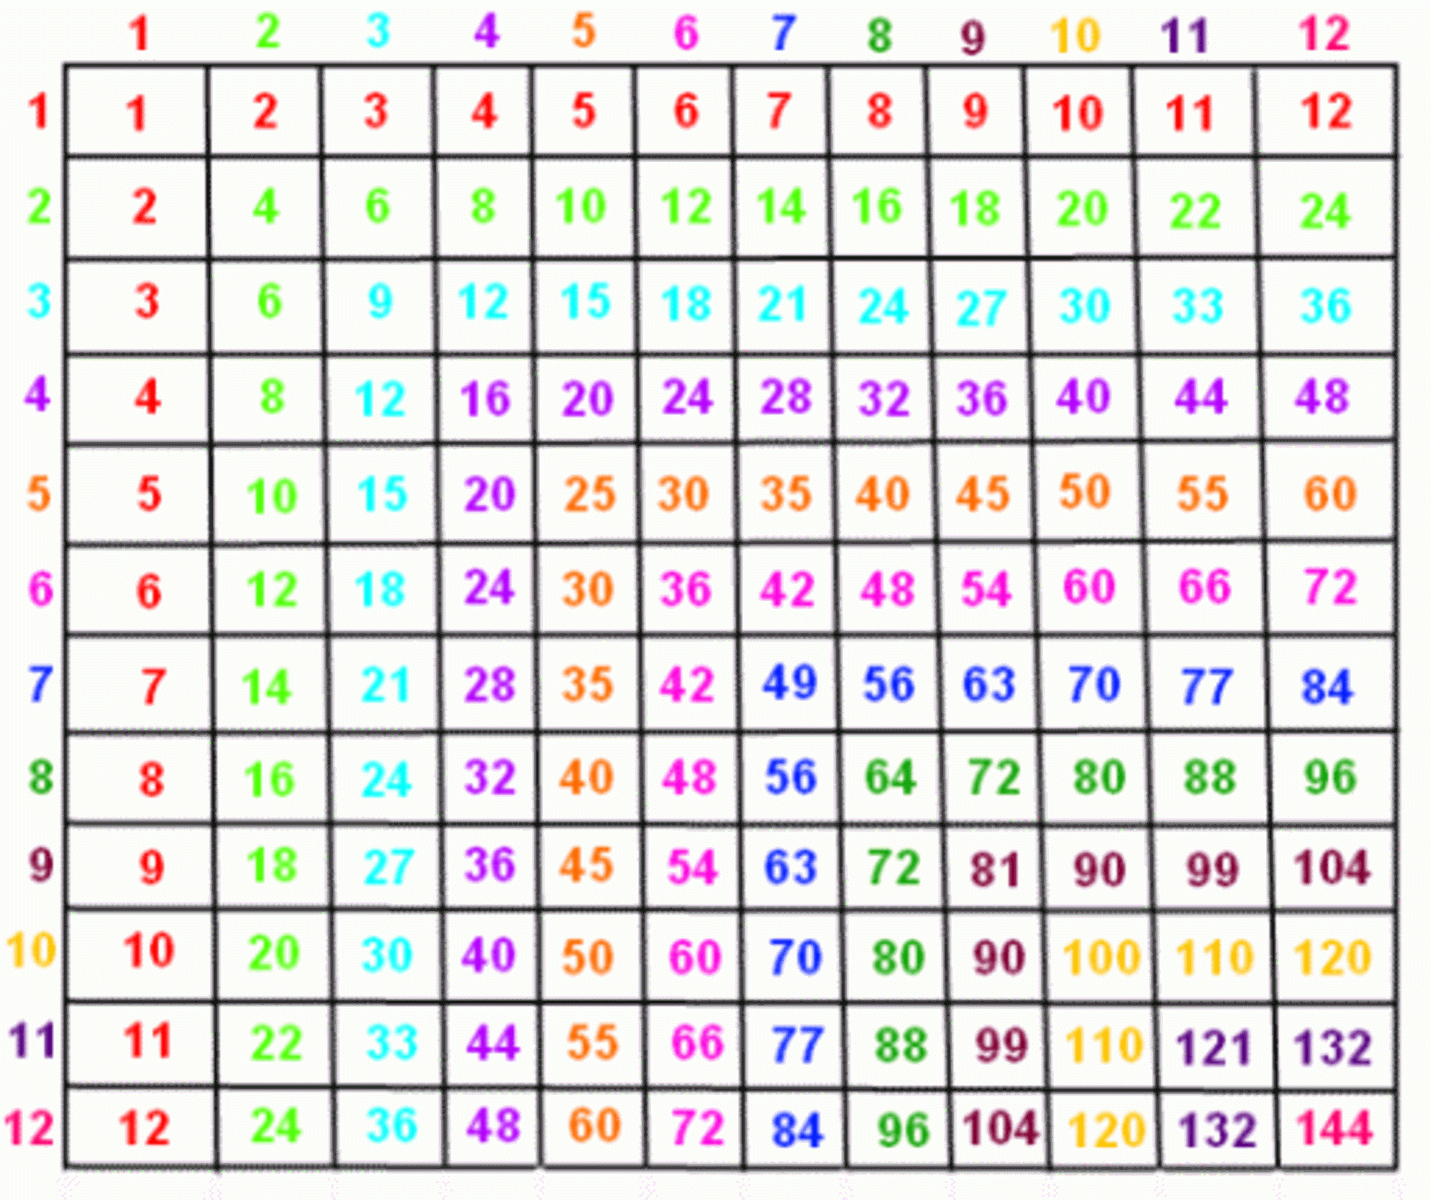 Multiplication Table Printable Photo Albums Of | Kids - Free Printable Multiplication Table